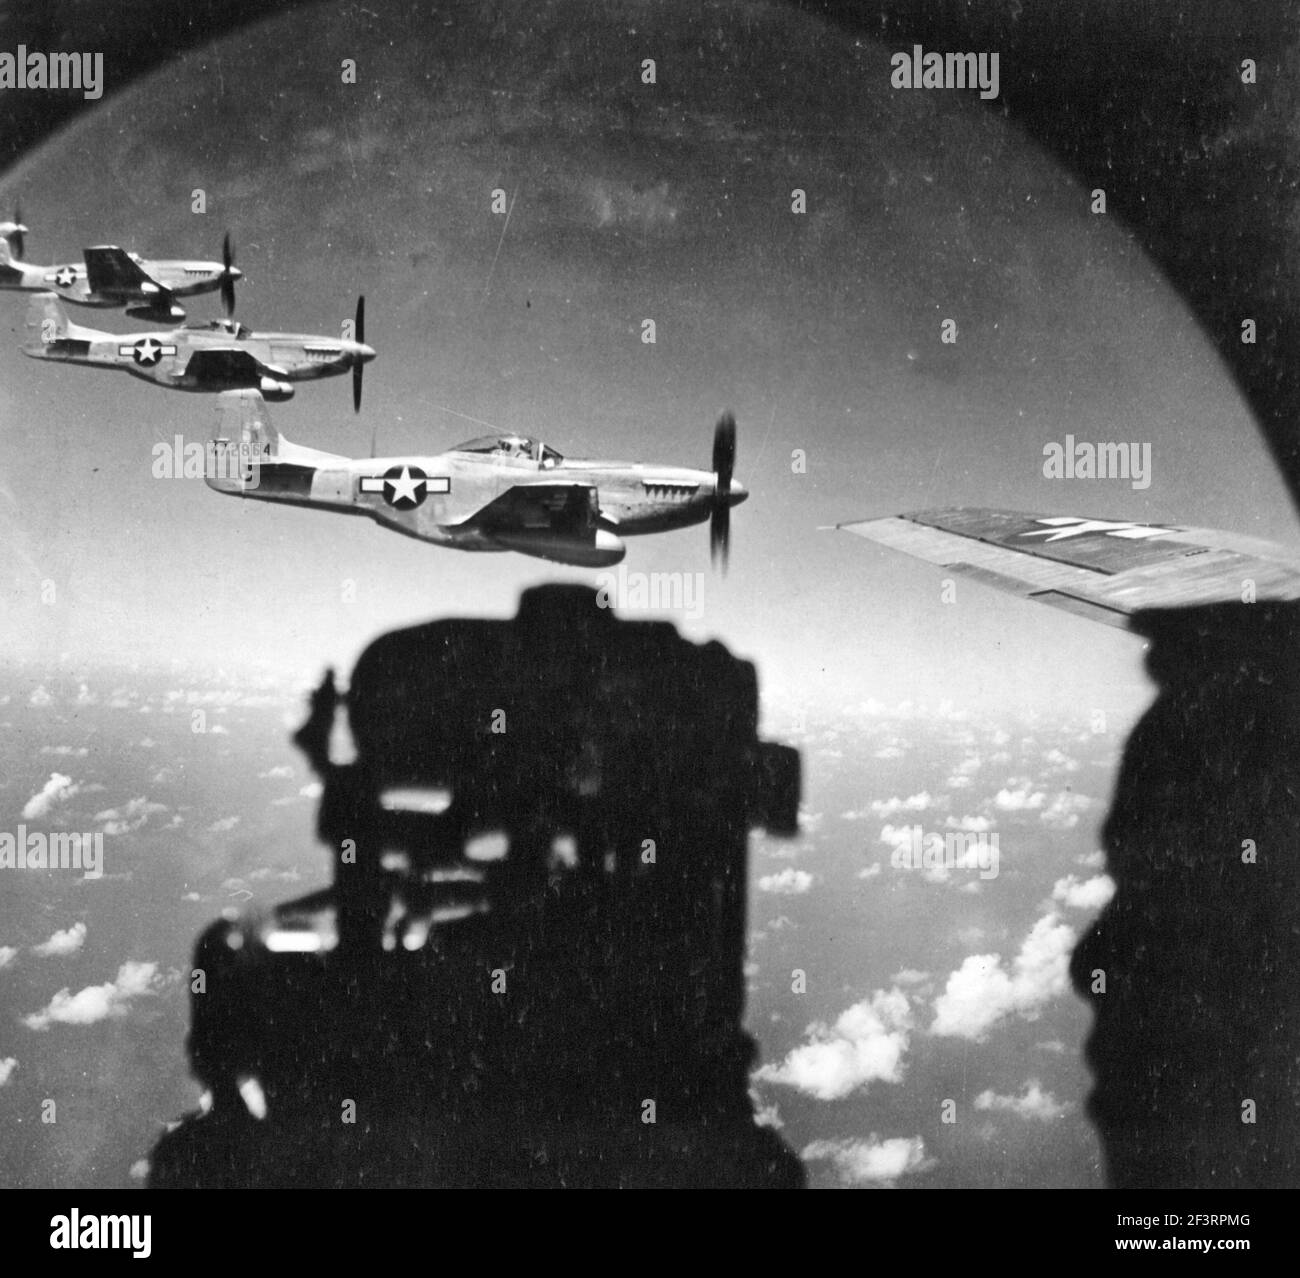 Waist Gunner Of Escort B-29 Superfortress Watches A Trio Of North American P-51 Mustangs Flying Close-In During A Fighter Sweep To Japan Stock Photo